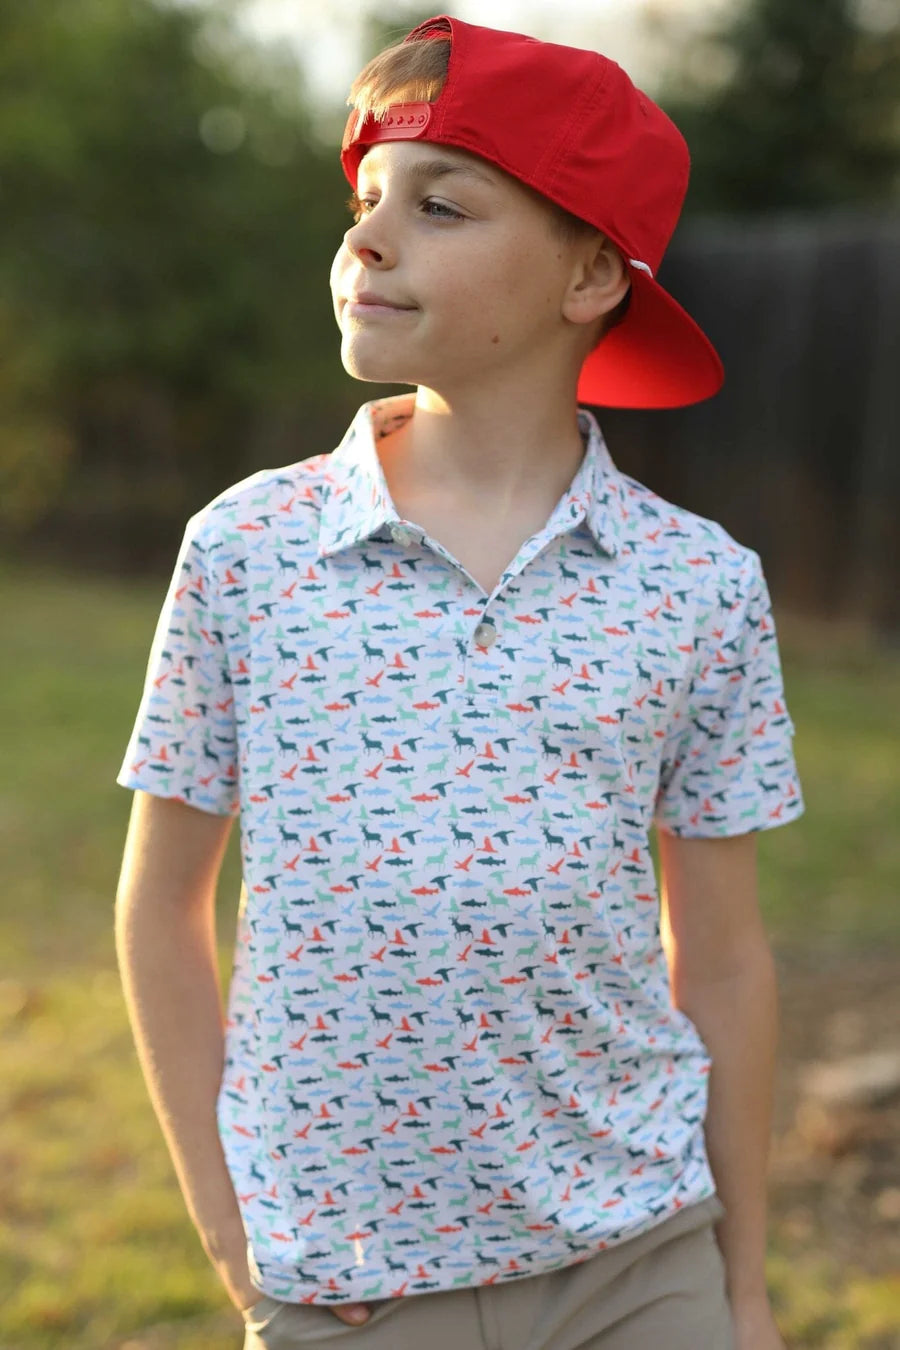 Burlebo - The Great Outdoors Youth Polo Shirt